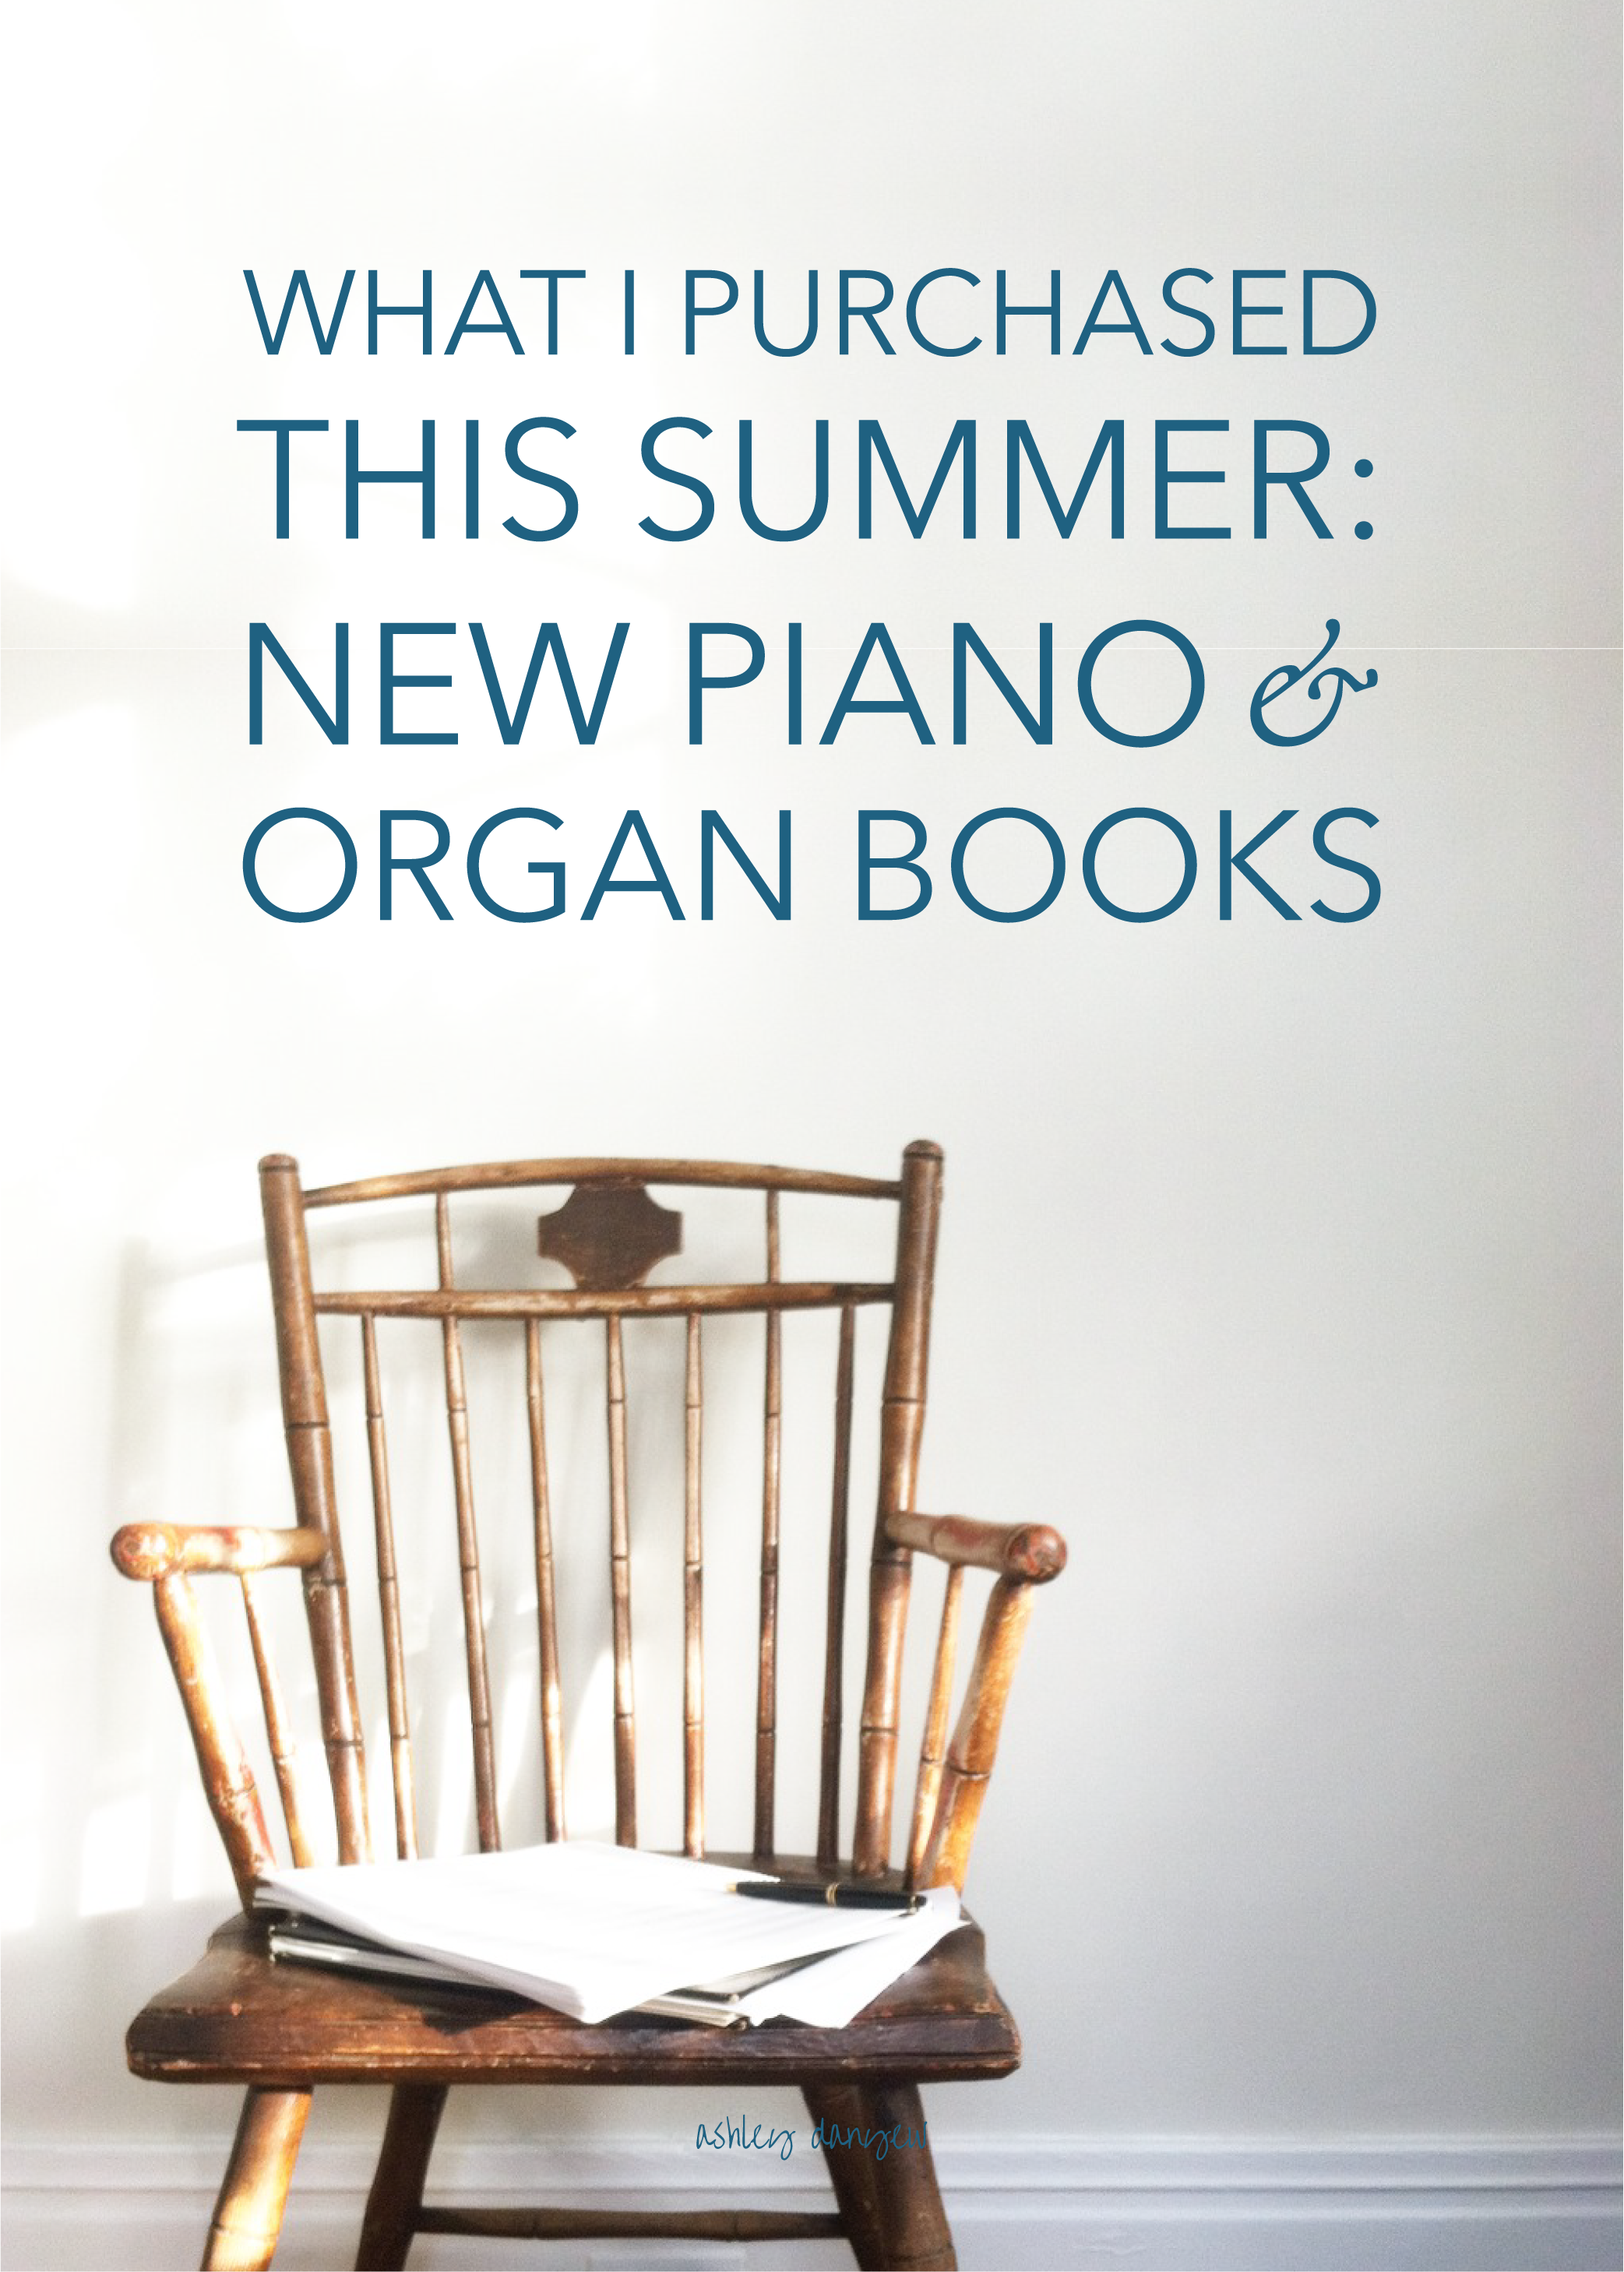 Copy of What I Purchased This Summer: New Piano and Organ Books